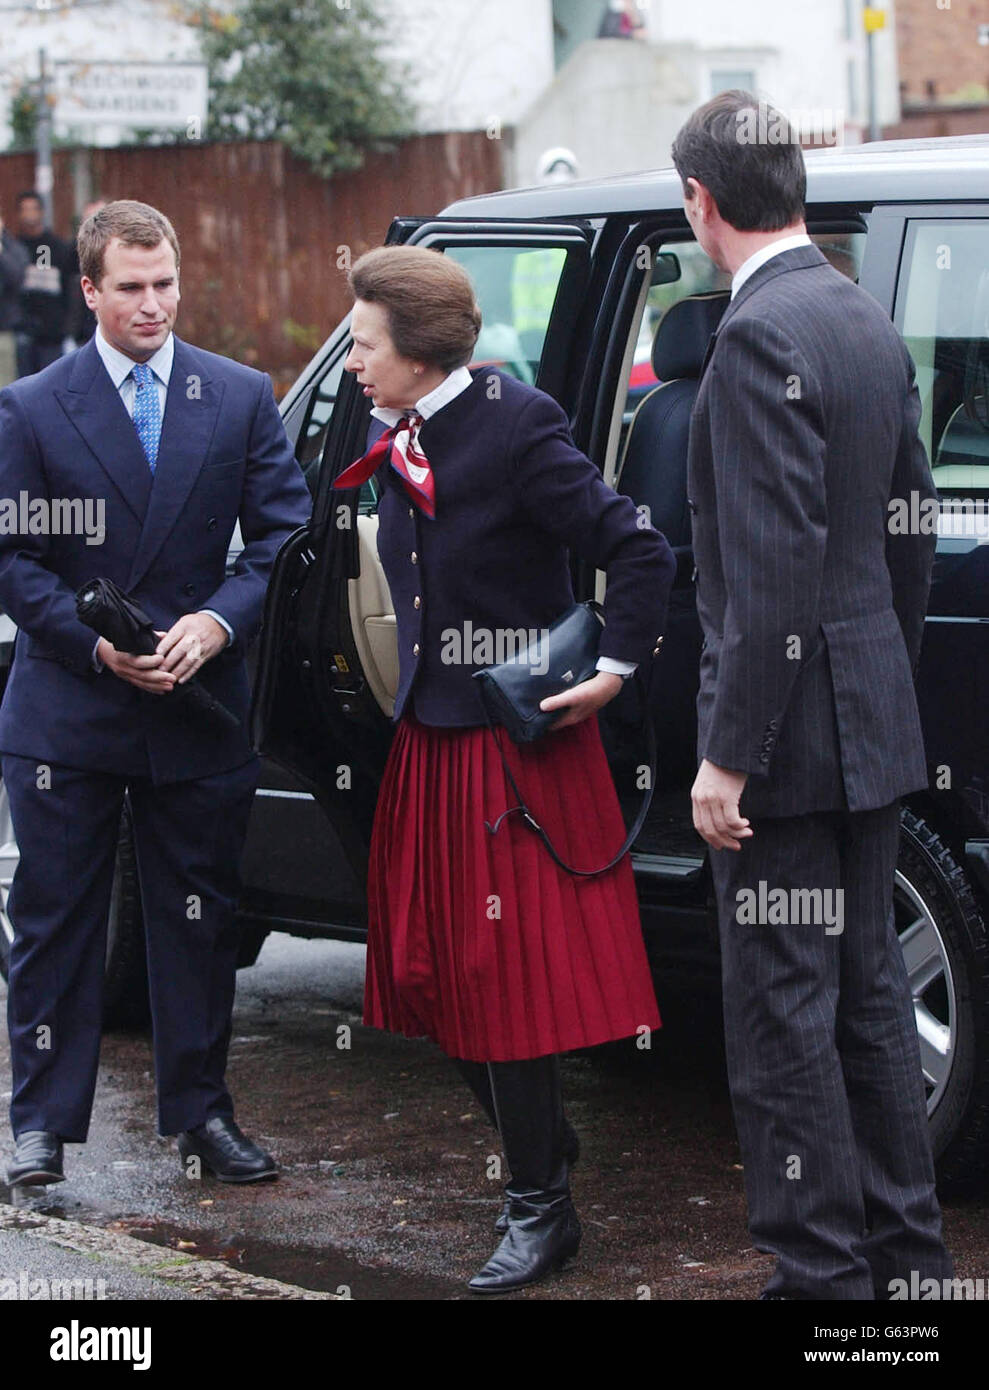 The Princess Royal and her husband, Commander Tim Laurence (right), arrive with her children, Peter (left) and Zara (hidden) Phillips, at East Berkshire Magistrates Court in Slough to face allegations that her dog bit two children in Windsor Great Park. The couple have been summonsed under Section 3 (1) of the Dangerous Dogs Act 1991 and are alleged to have been in charge of a dog that was dangerously out of control in a public place and injured the children. The Princess would become the first royal to have a criminal record if convicted of the charges. Stock Photo